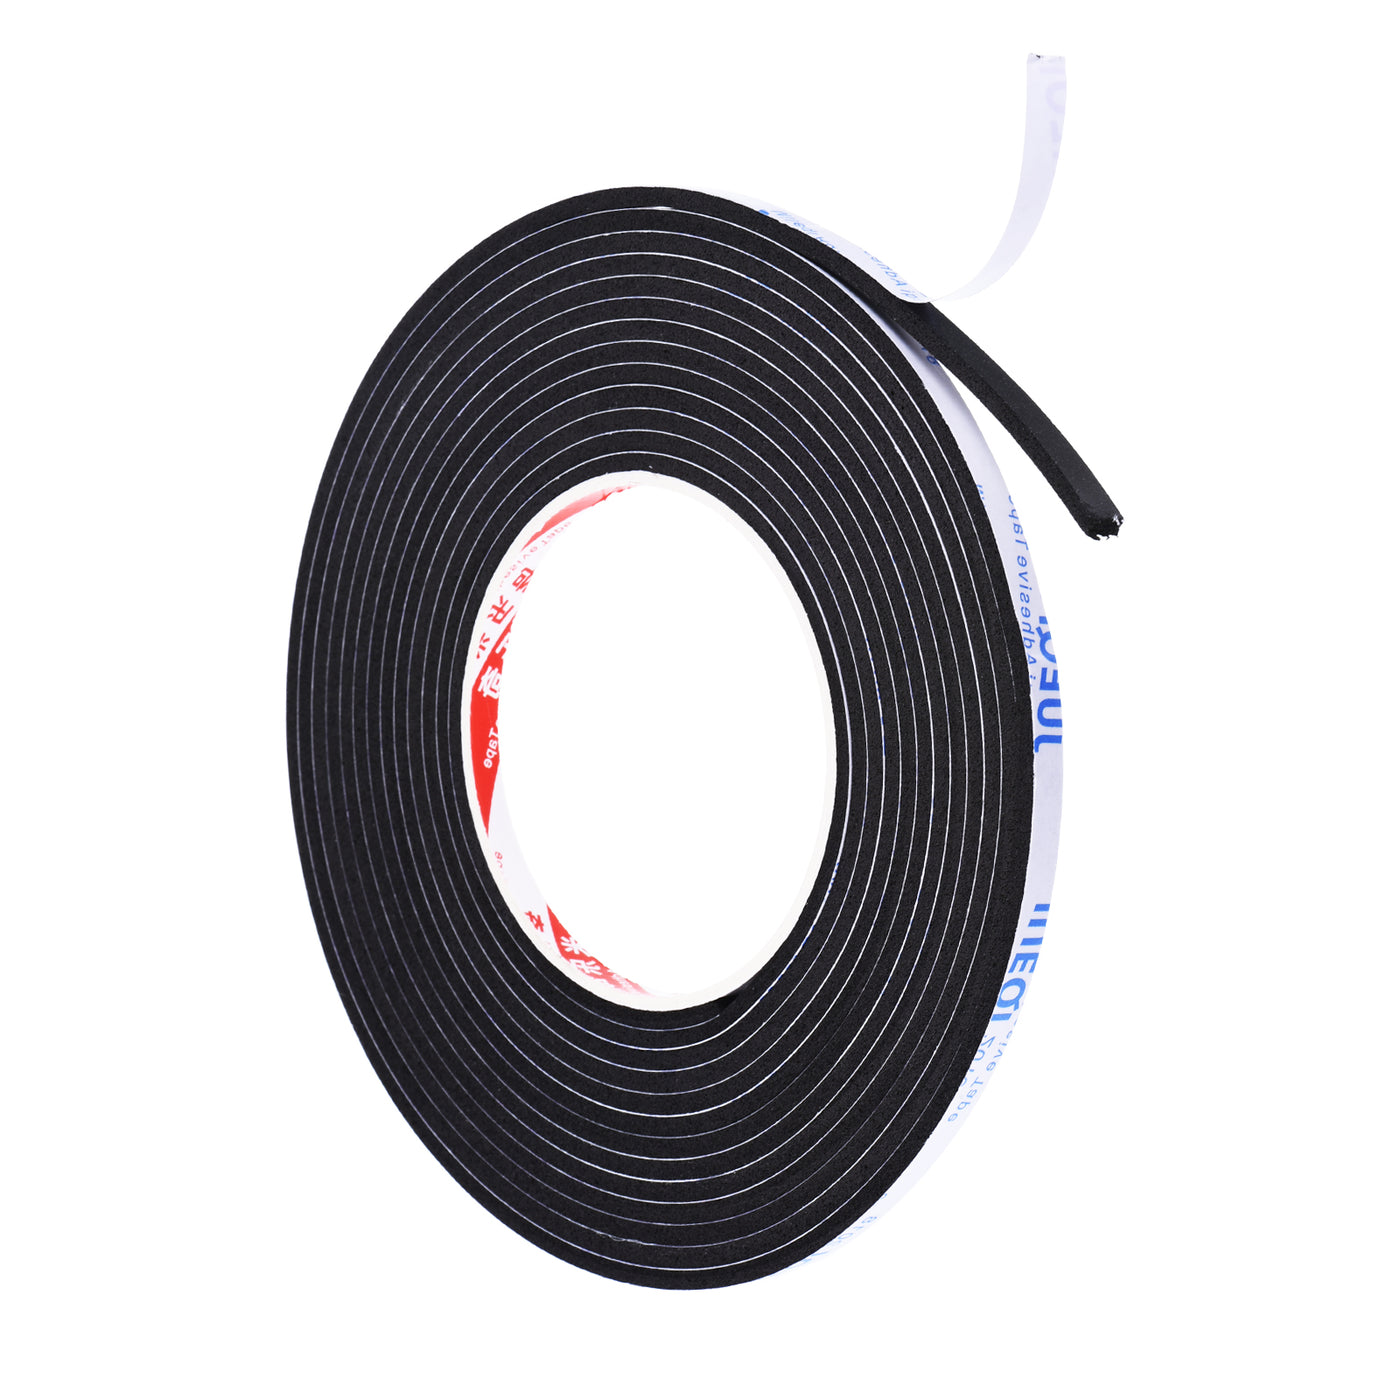 Harfington 5m/16.4ft Sealing Foam Tape, 6mm Wide 3mm Thick Single Sided Weather Stripping Door Seal Strip for Window Door Insulation, Black